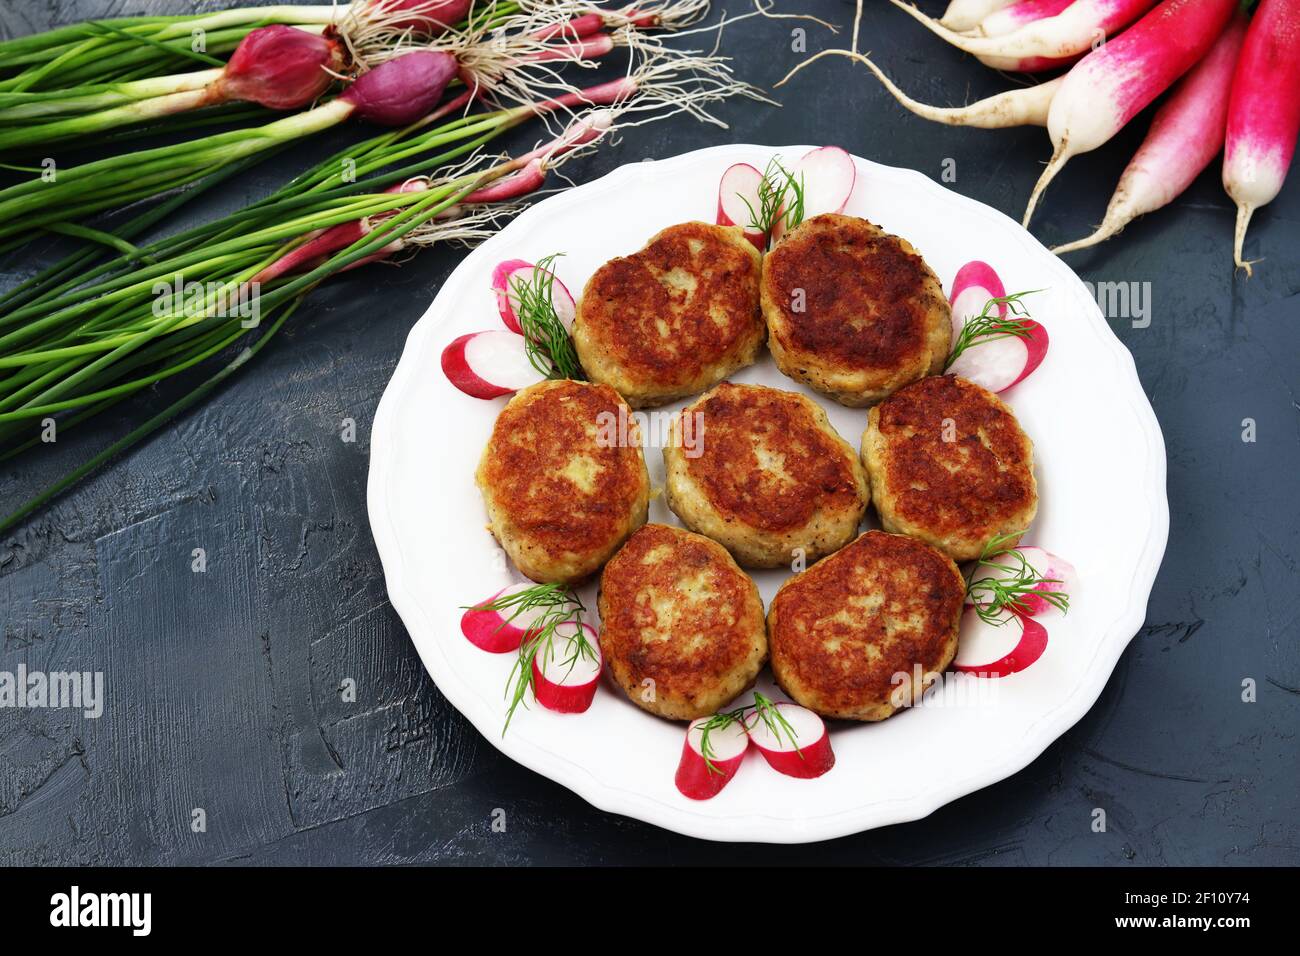 Fish patties on a white plate against a dark background, as well as vegetables: radish and green onions. Stock Photo